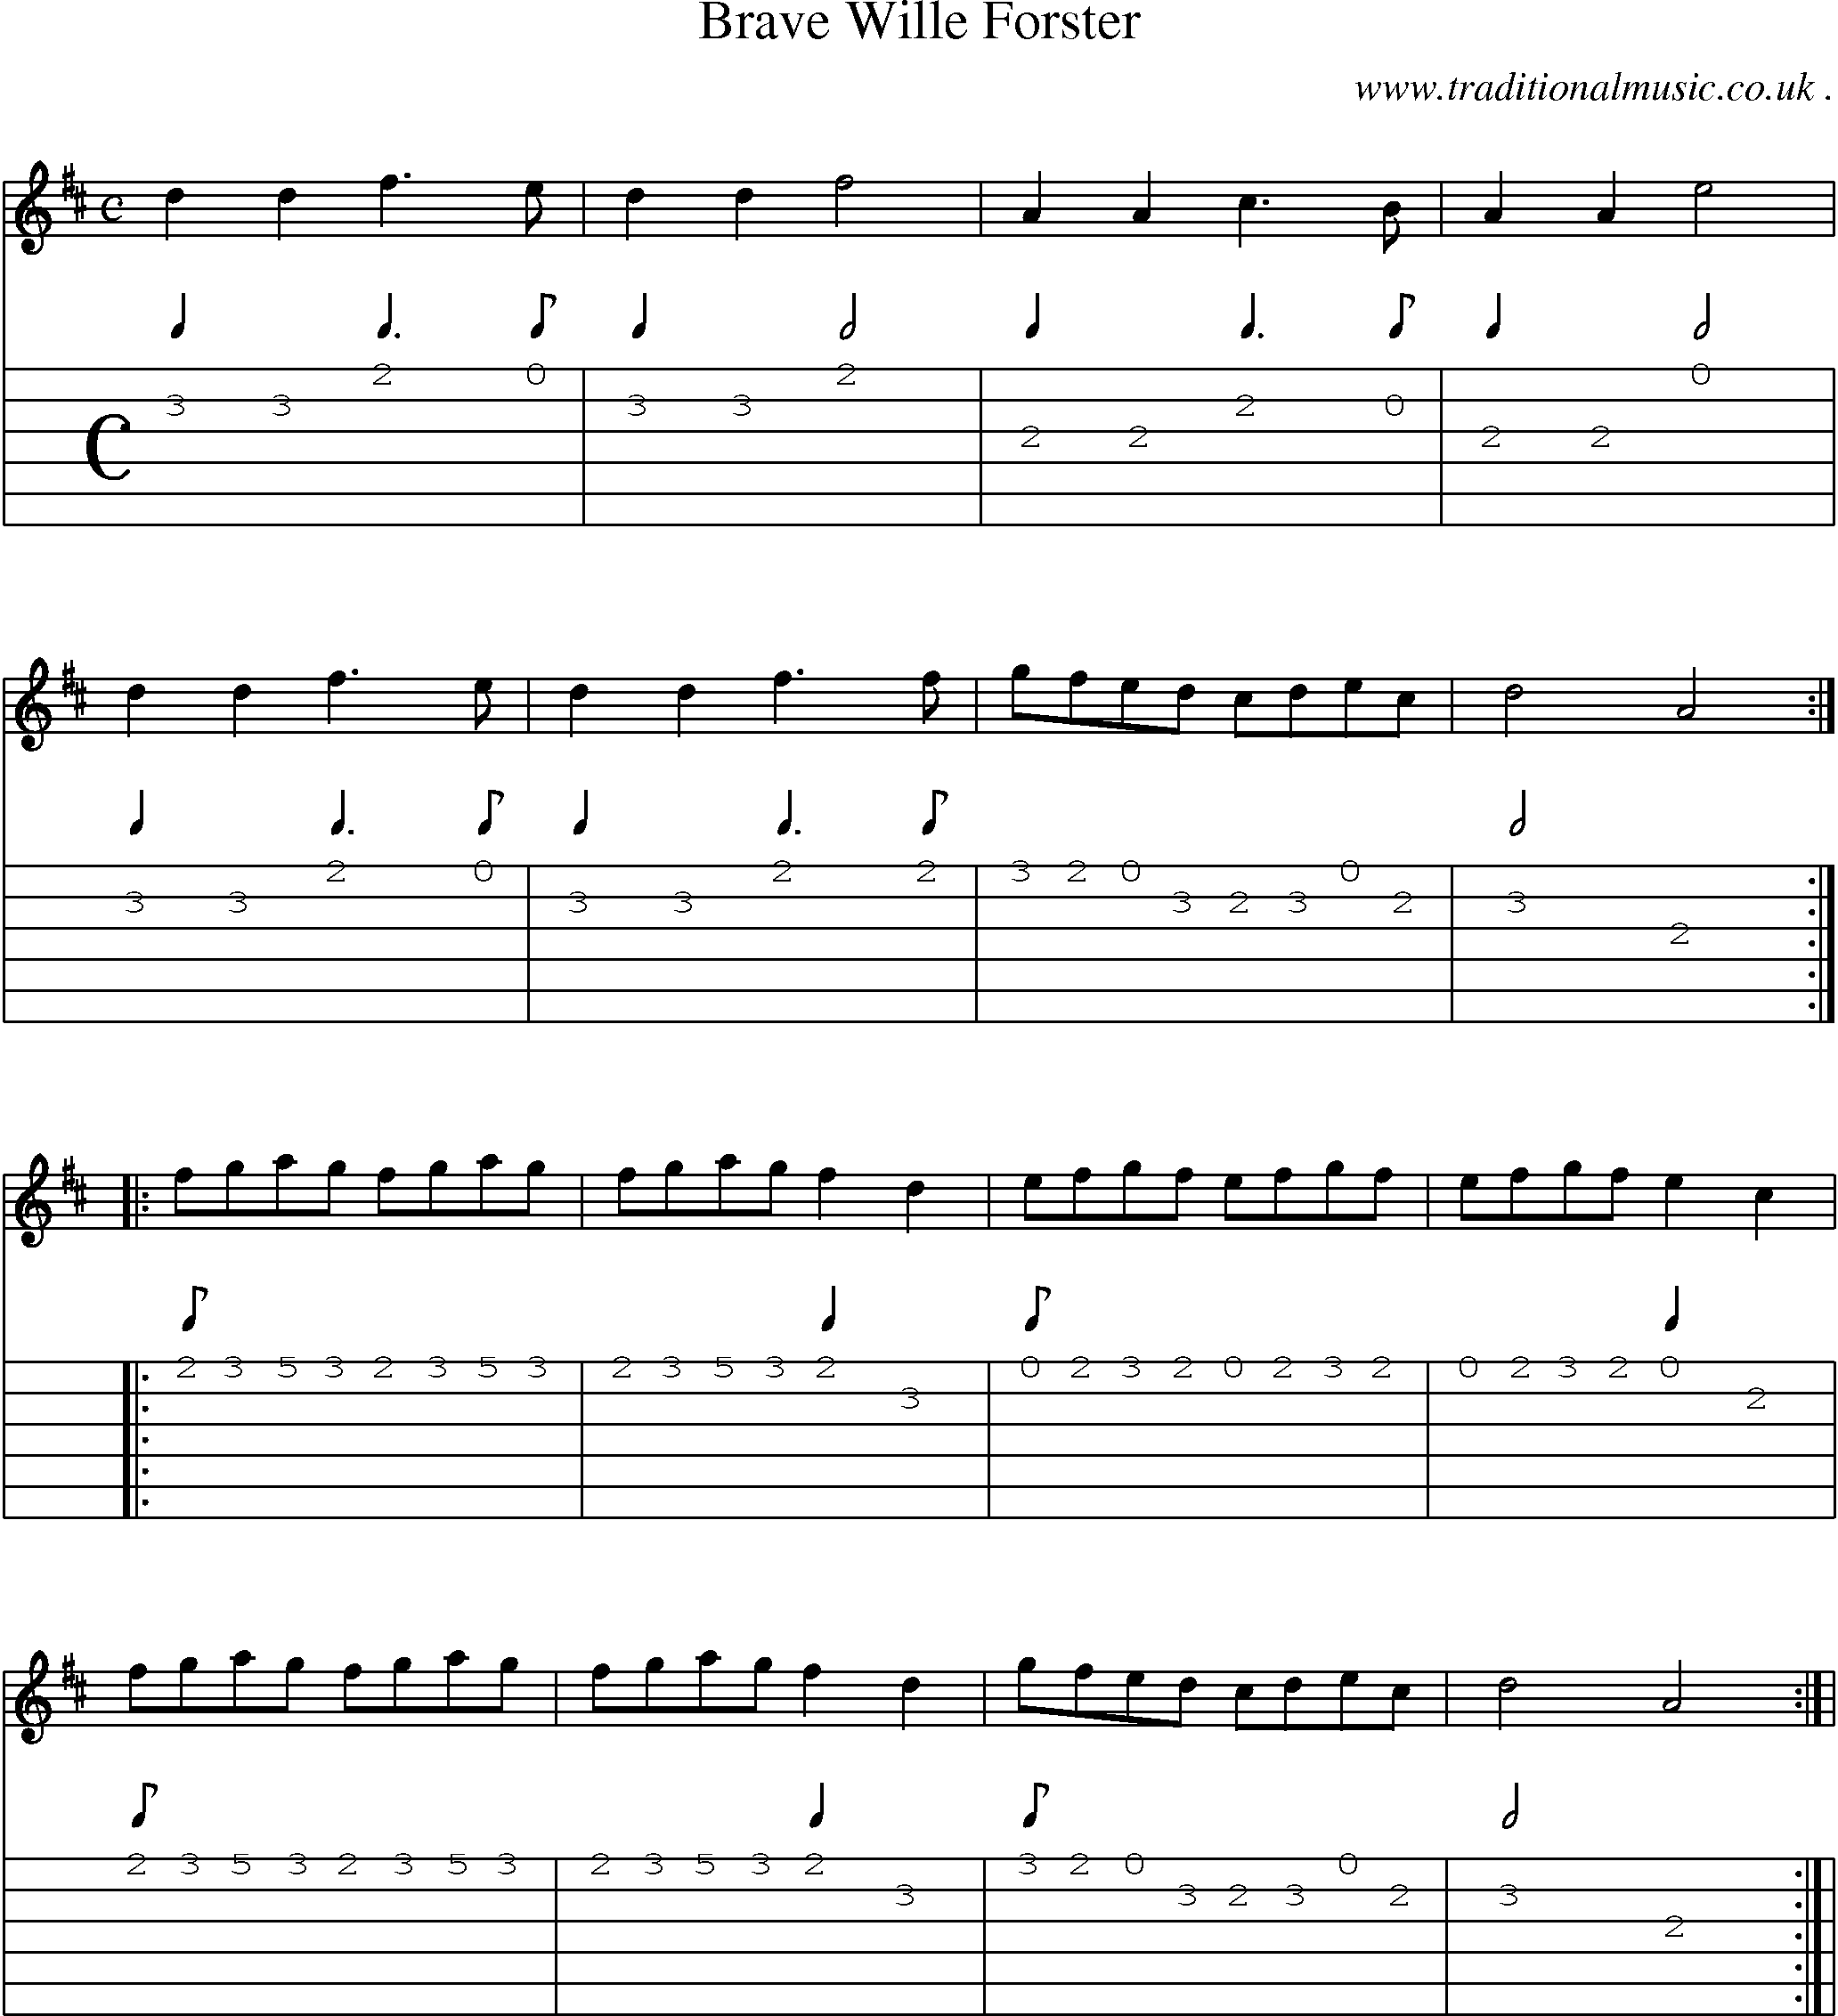 Sheet-Music and Guitar Tabs for Brave Wille Forster